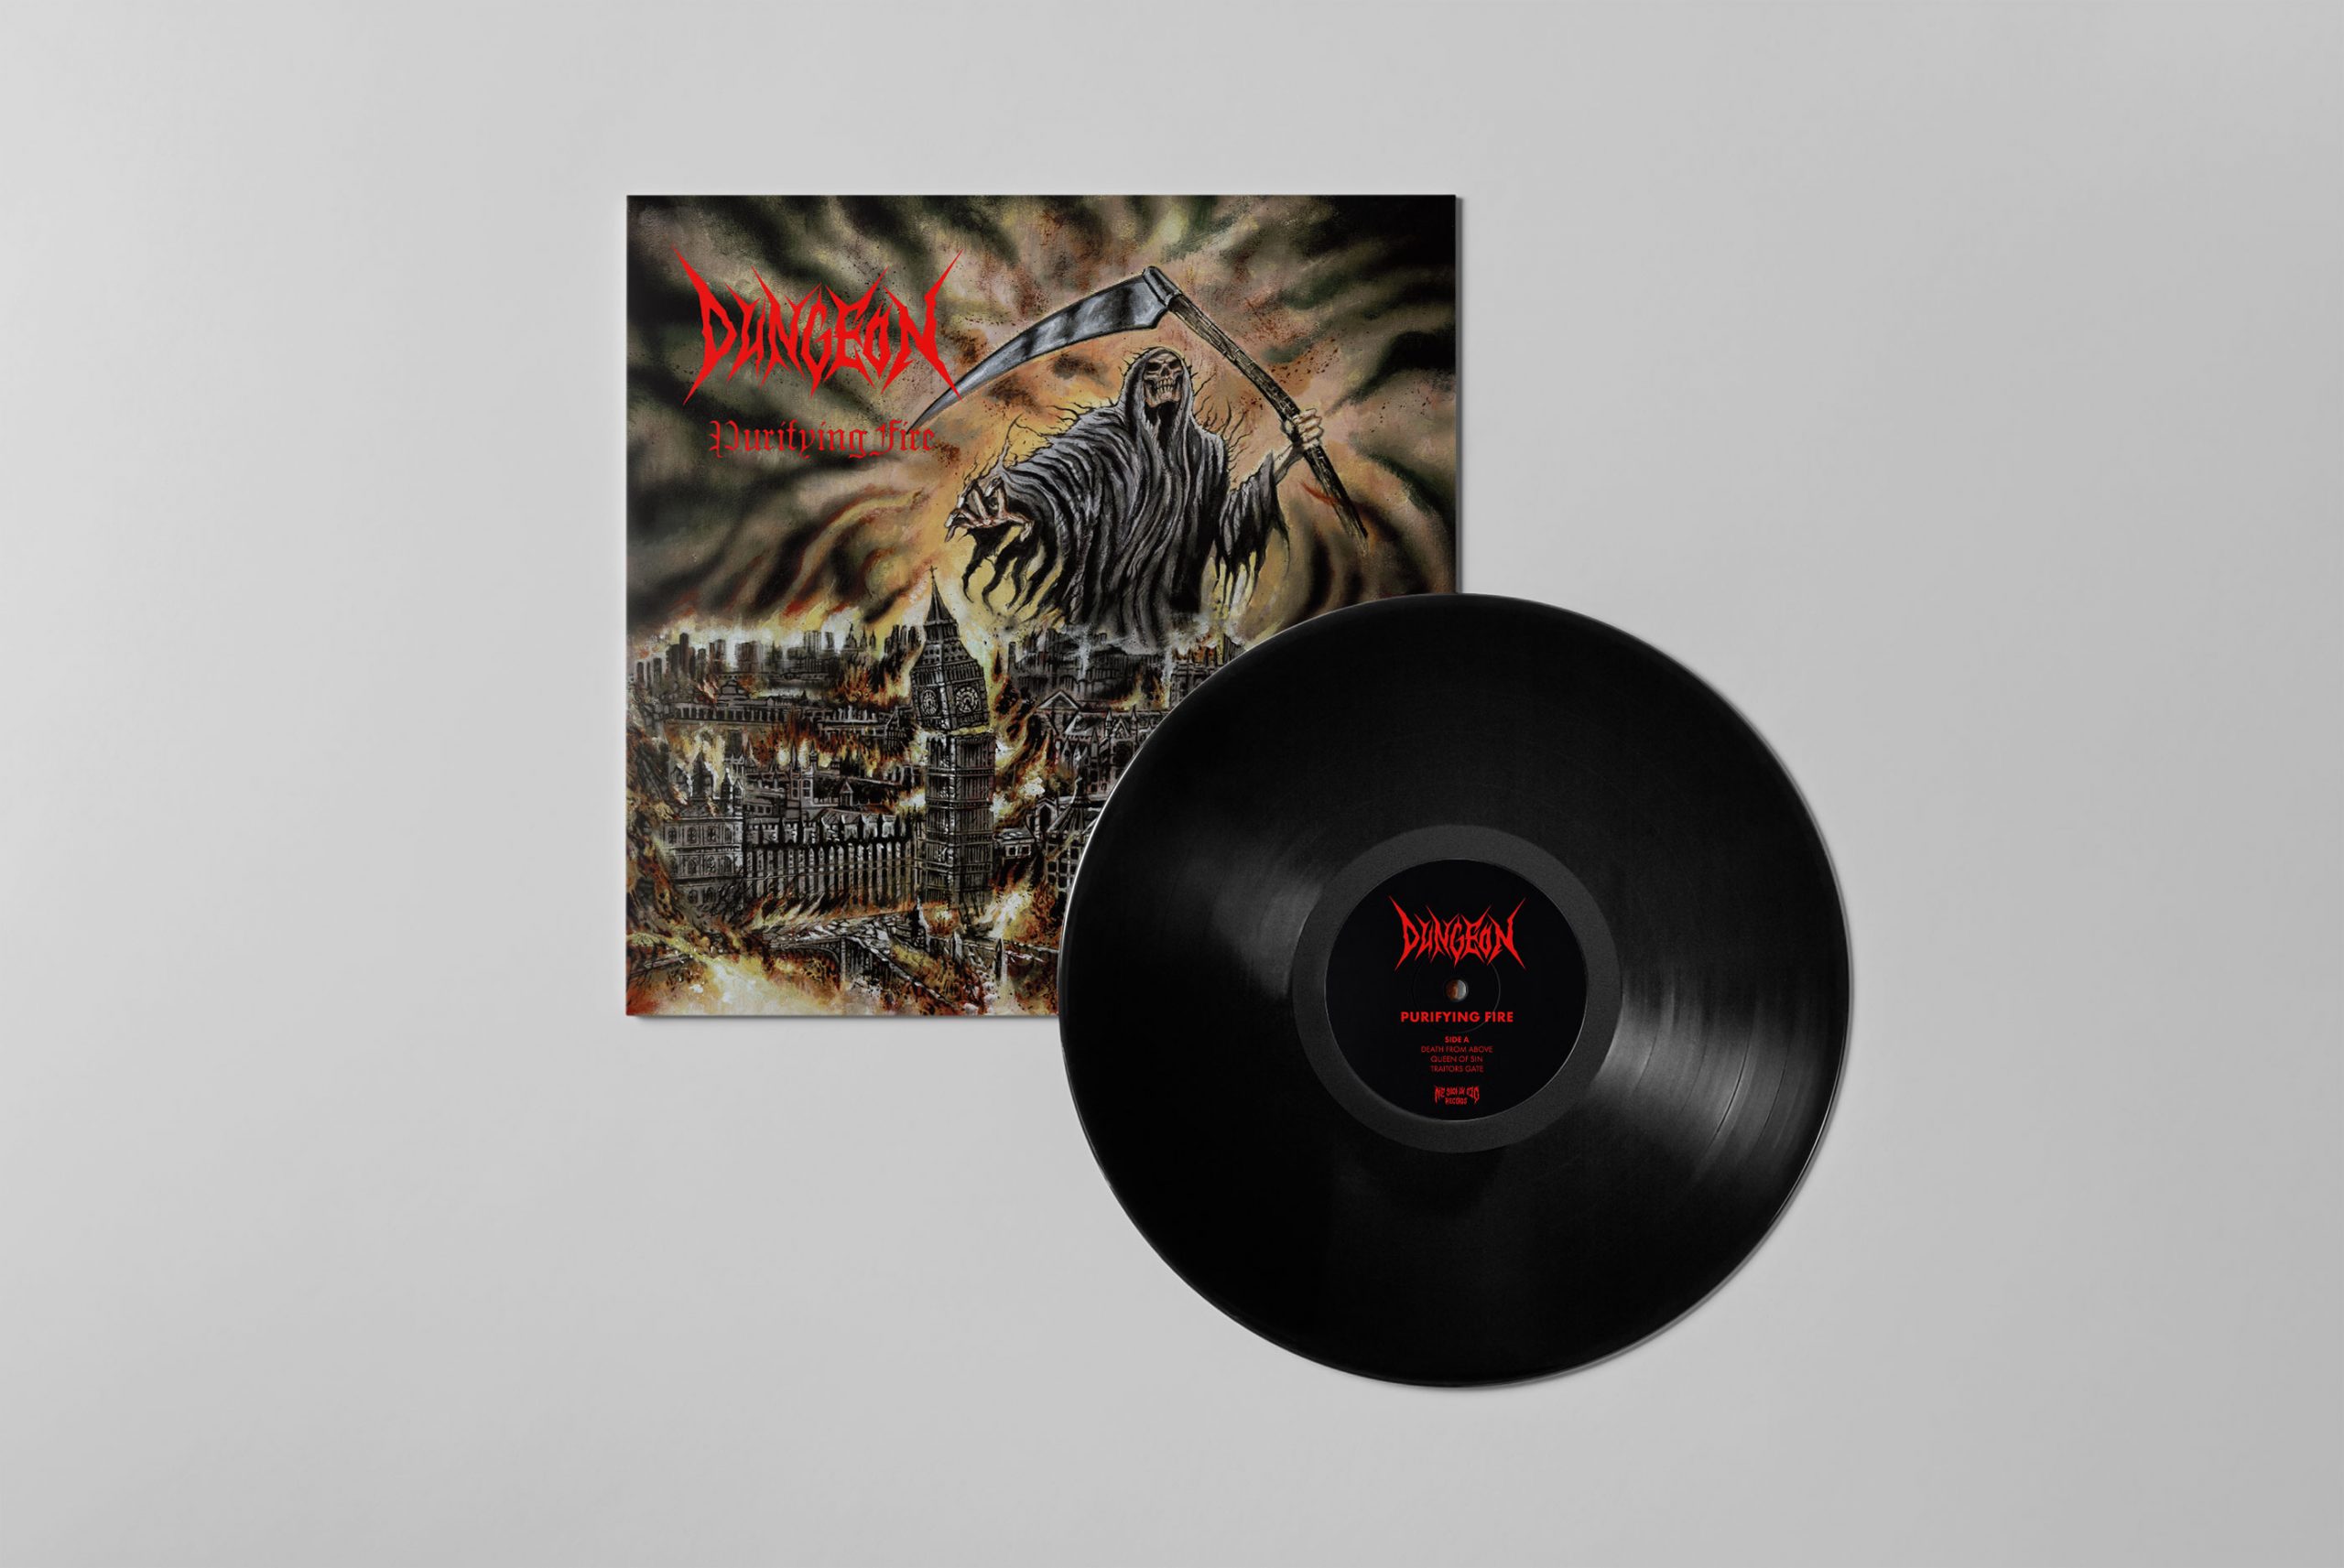 Dungeon – Purifying Fire on vinyl